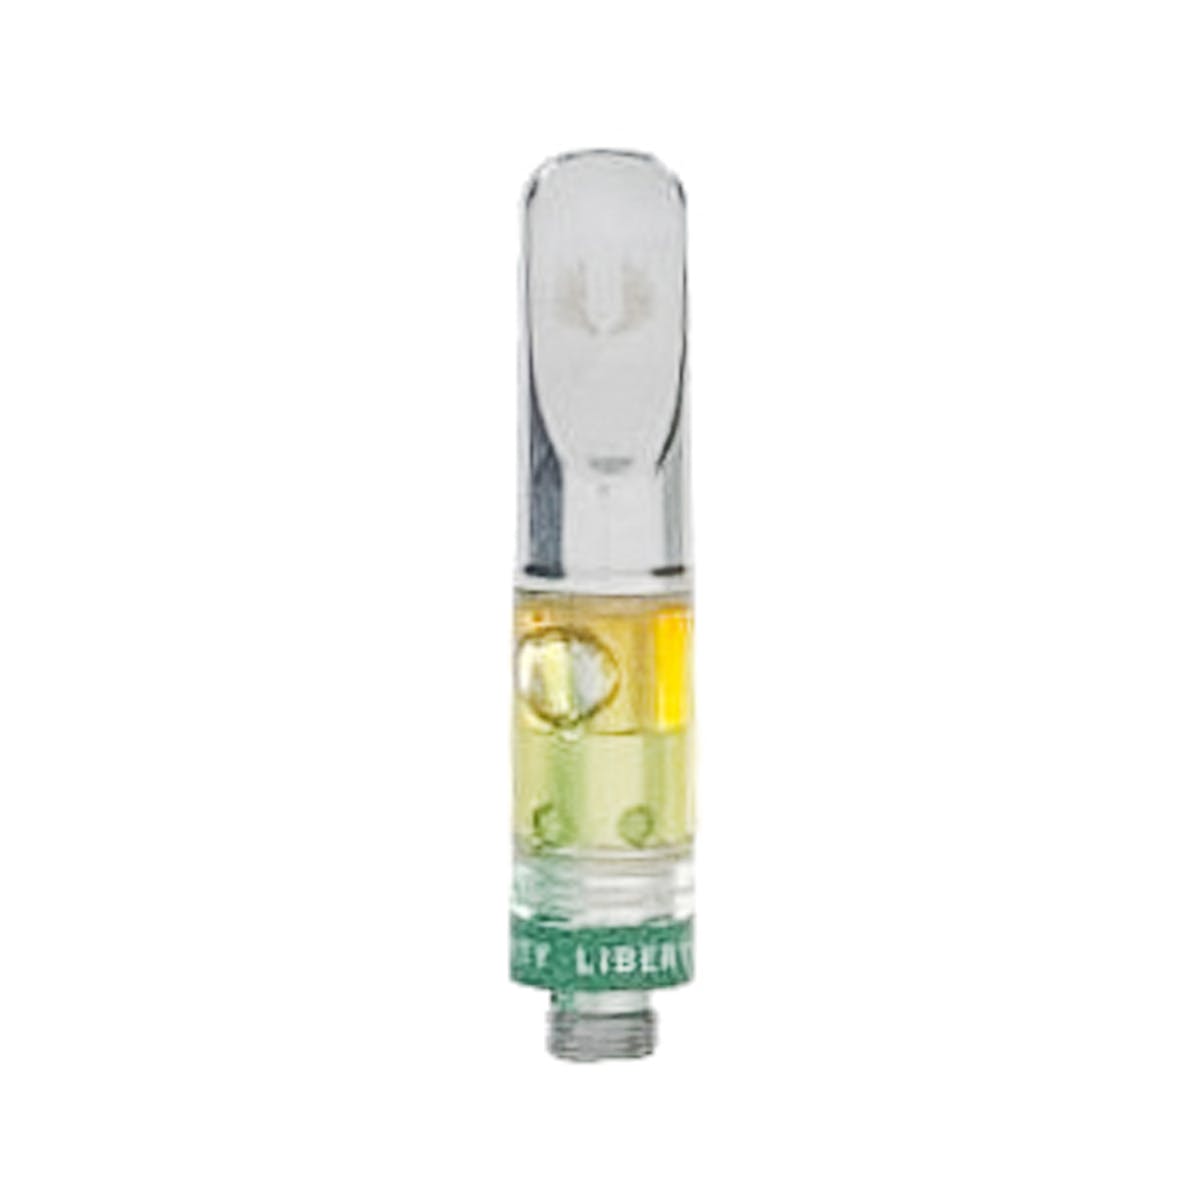 concentrate-liberty-harmony-cartridge